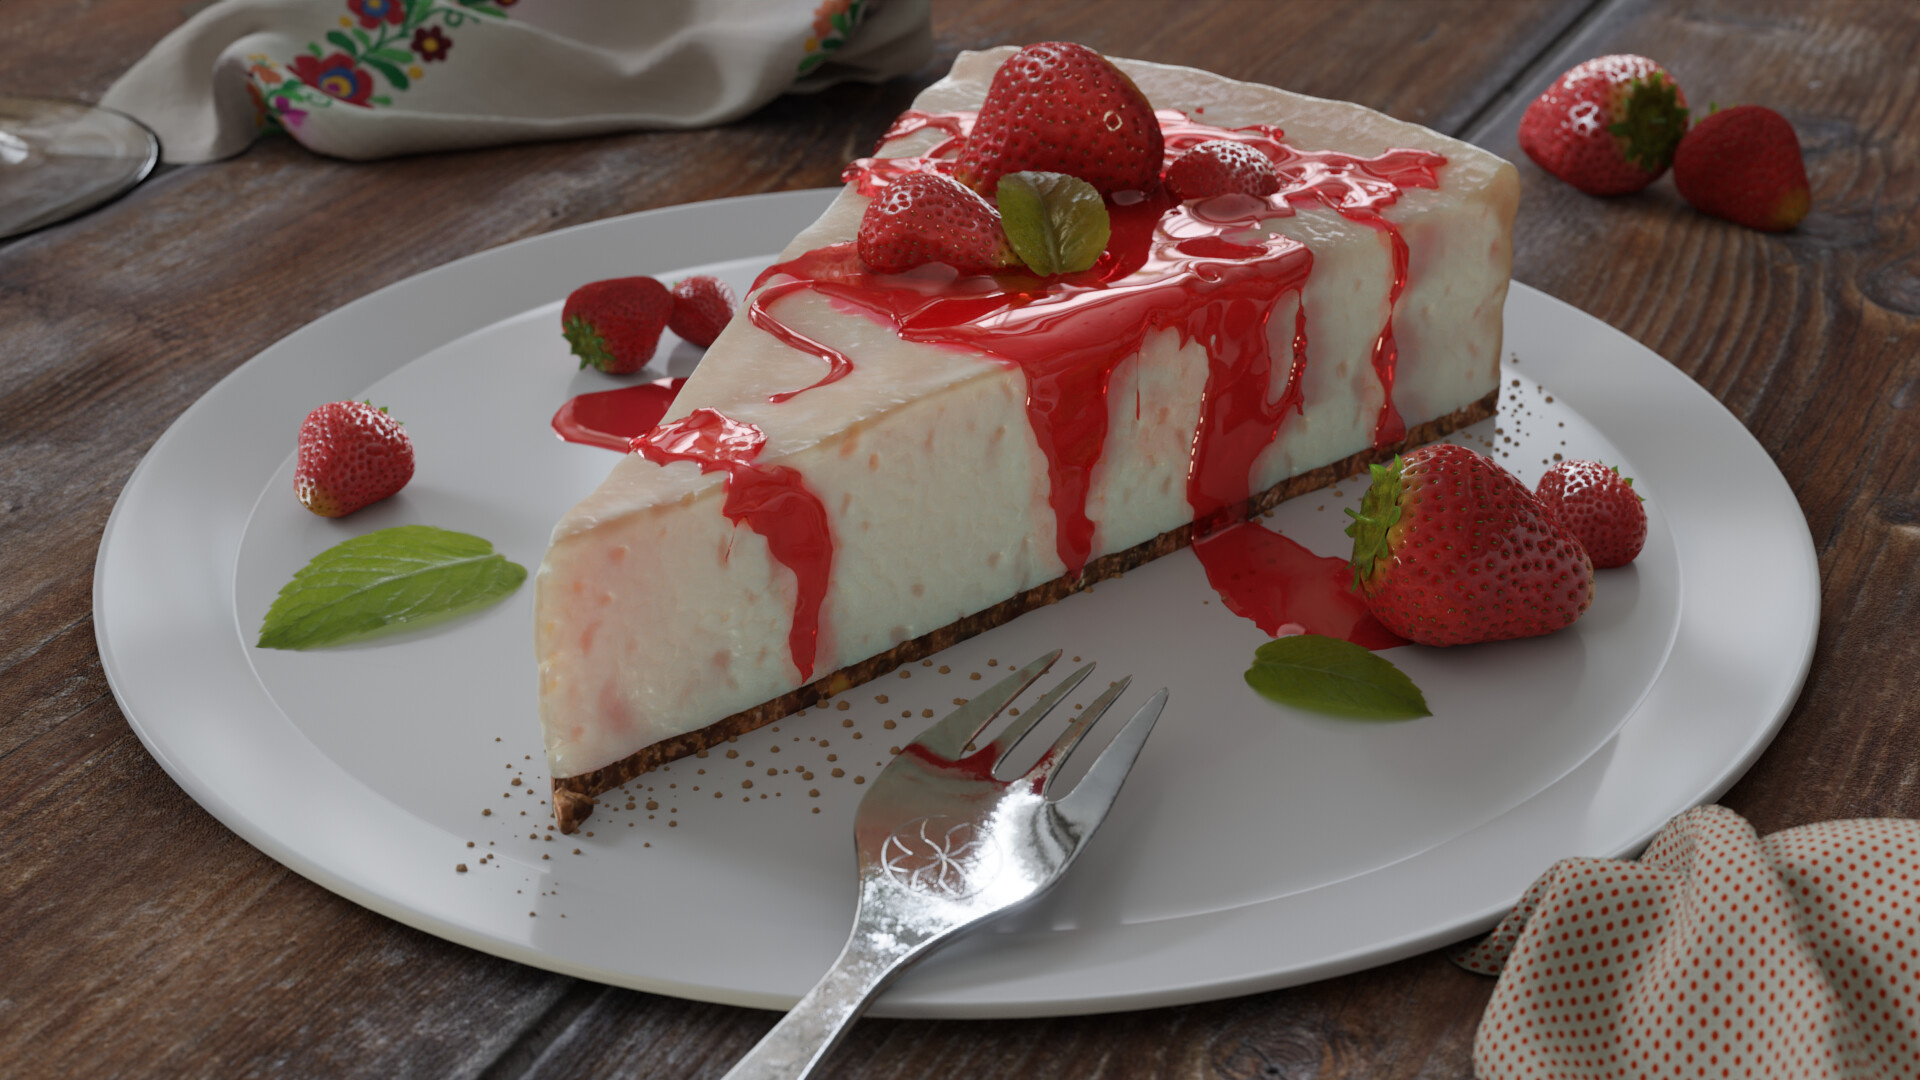 Cheesecake: Made with cream cheese, sugar, and eggs, A fruity topping. 1920x1080 Full HD Background.